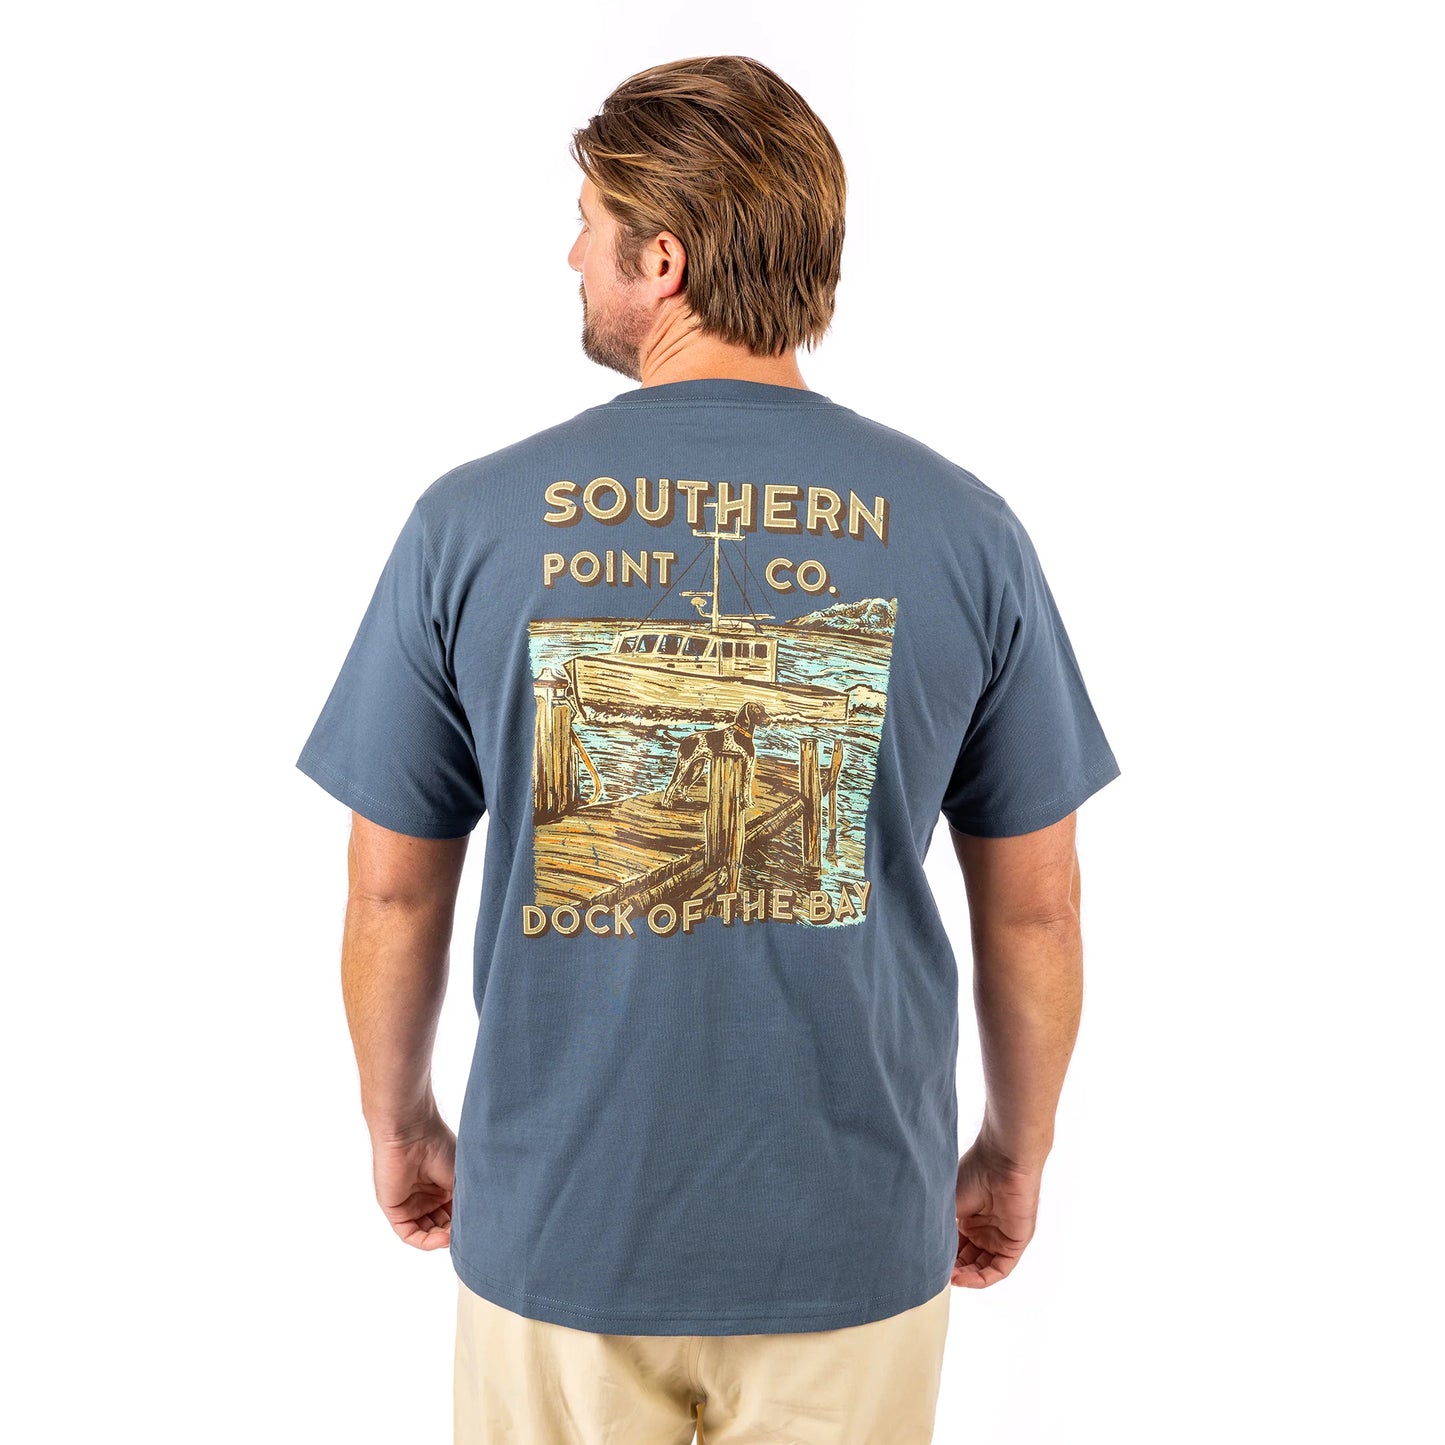 Southern Point Dock of the Bay Tee